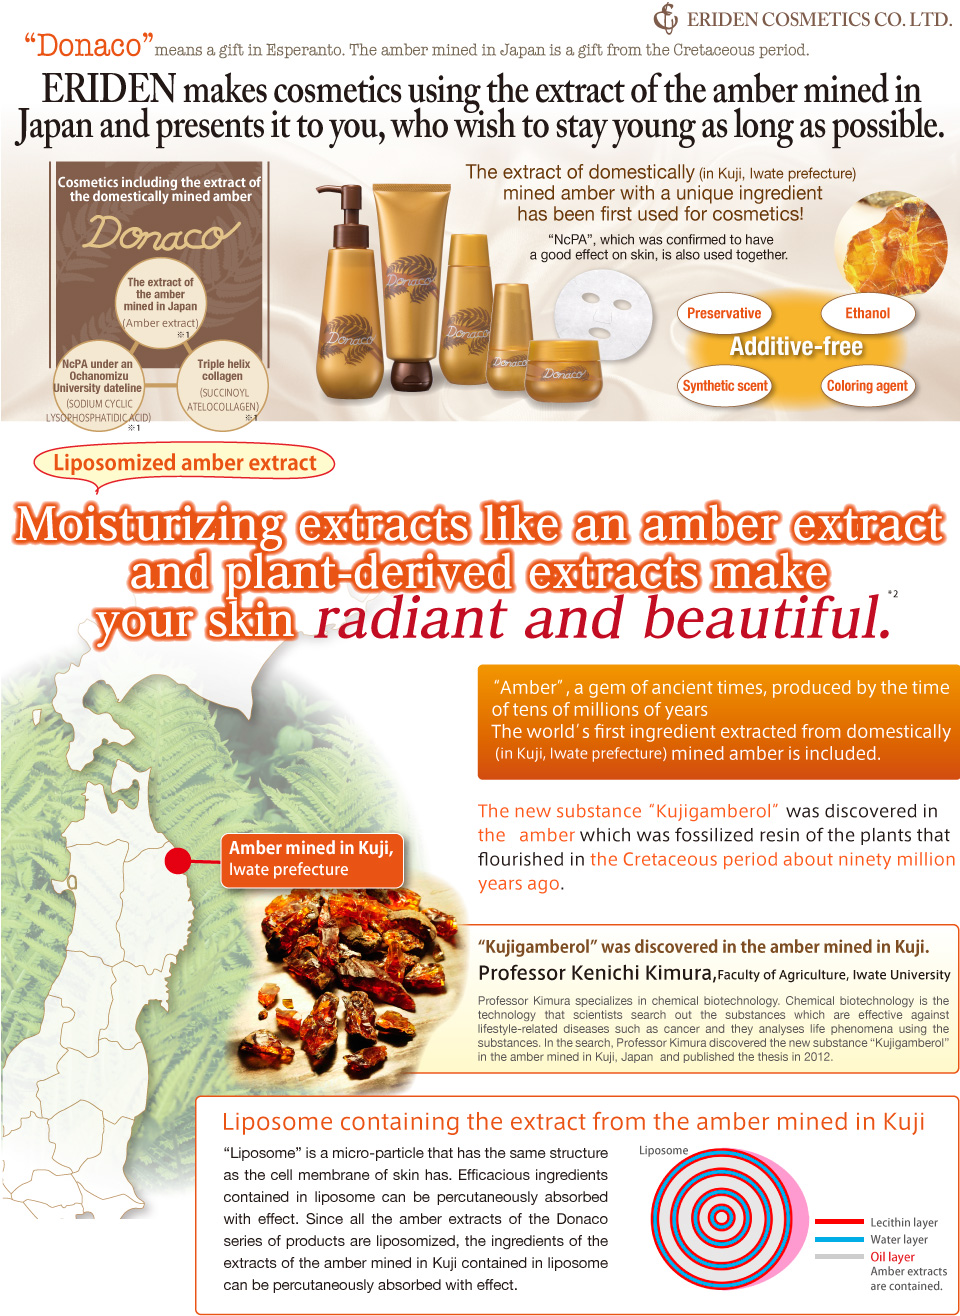 Moisturizing extracts like an amber extract and plant-derived extracts make your skin radiant and beautiful. 